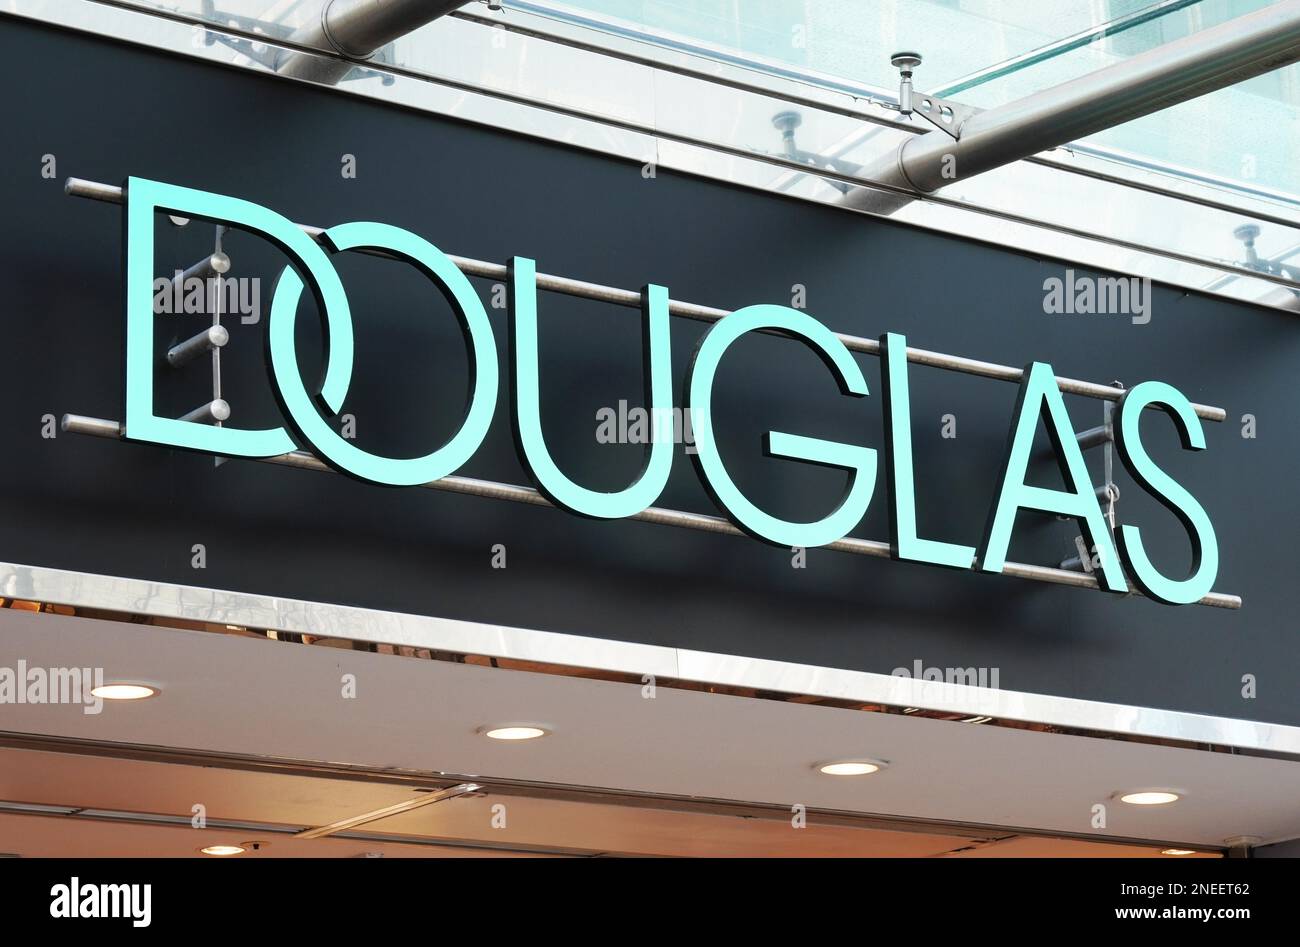 Hannover, Germany - March 2, 2020: Douglas is a german perfumery chain with international stores and market leader in europe Stock Photo